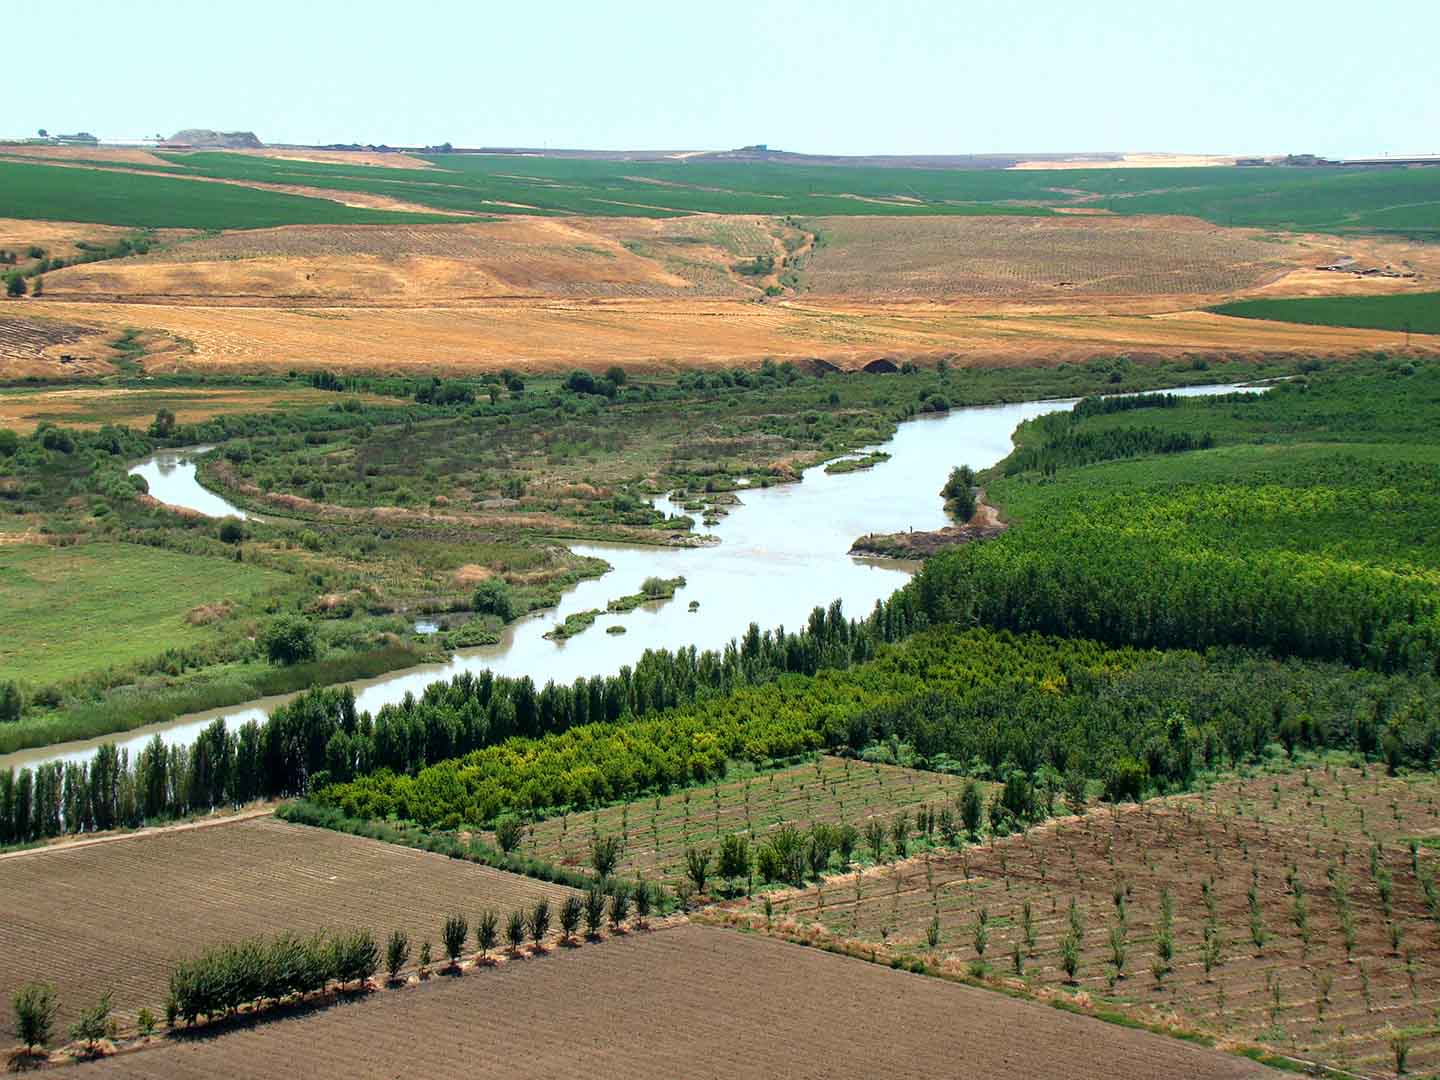 The Tale of Two Rivers: Euphrates and Tigris